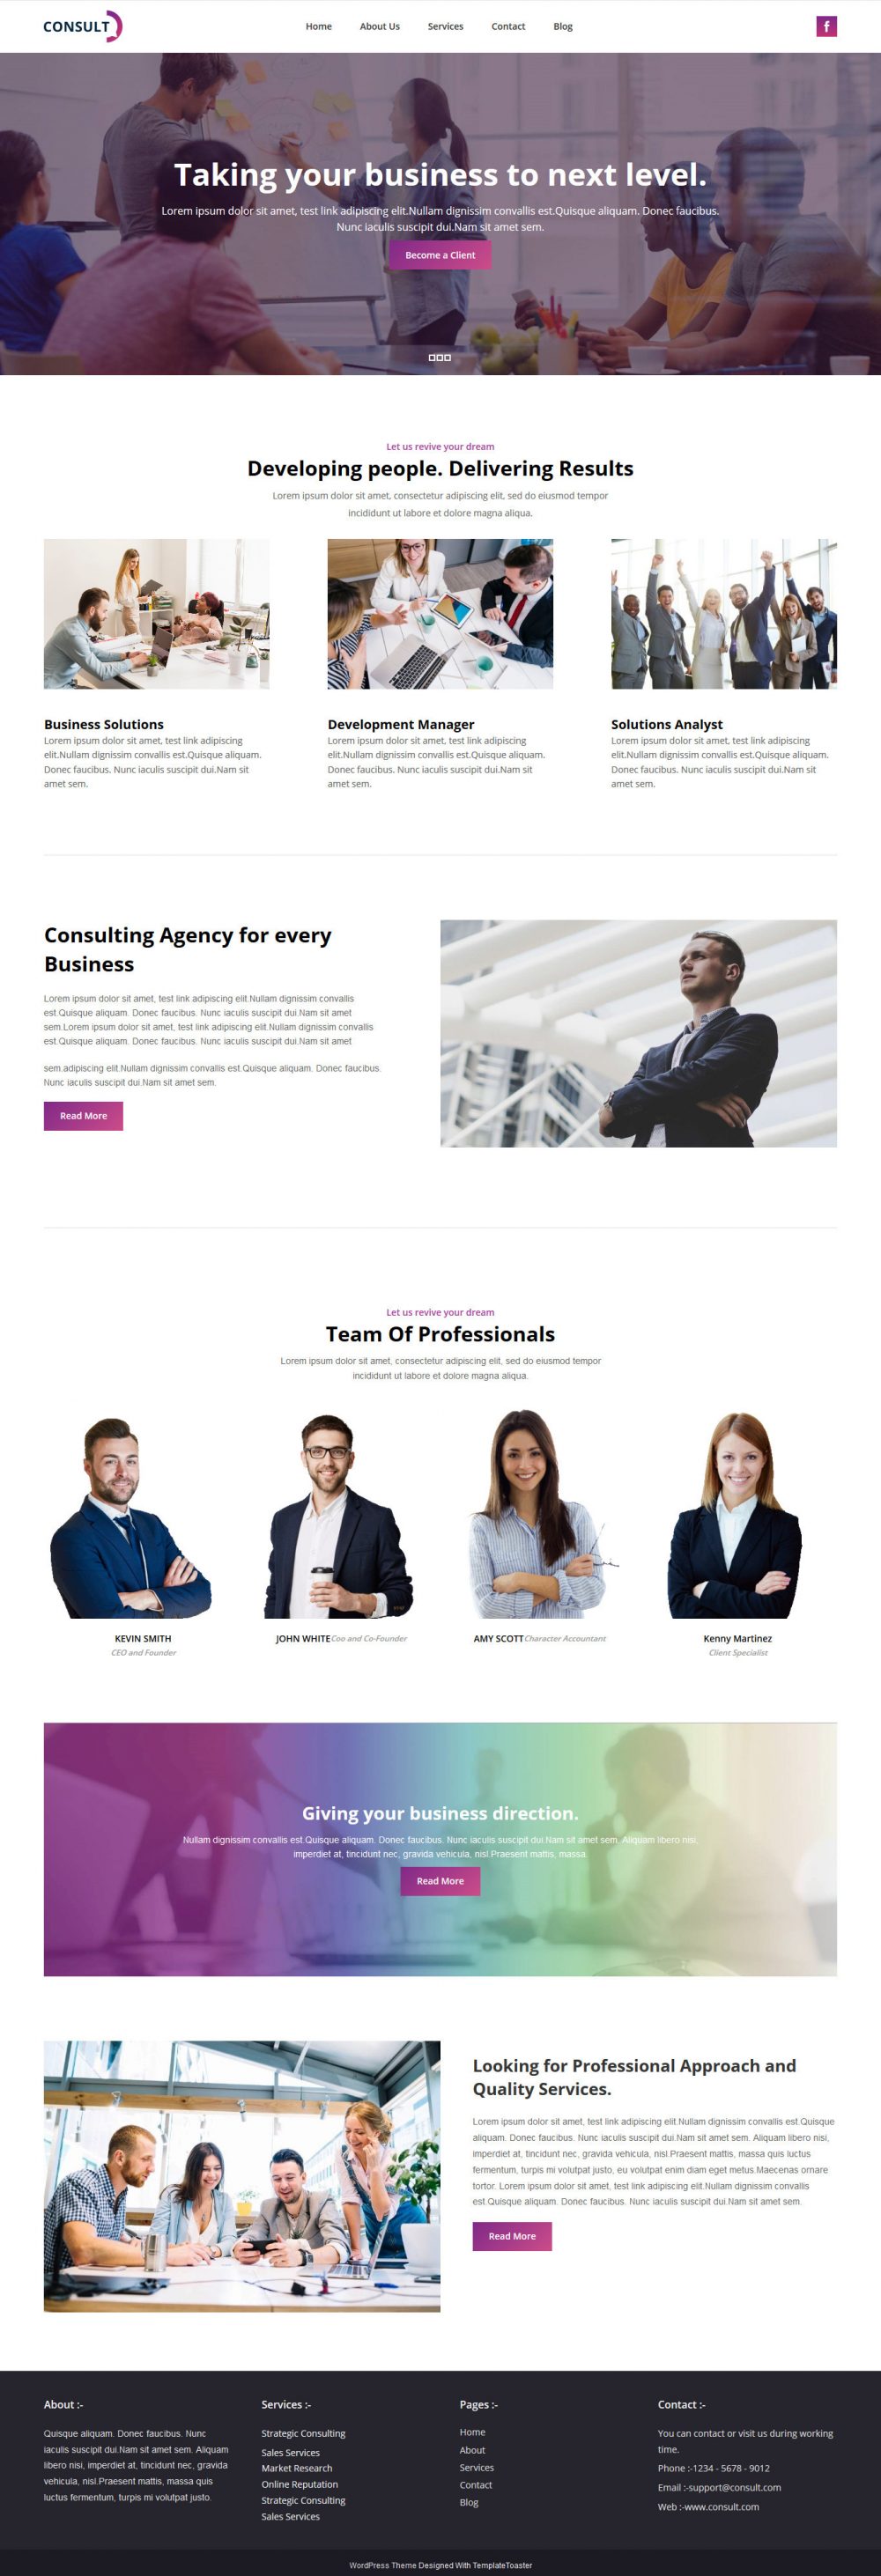 Consult Consulting Company Free WordPress Theme